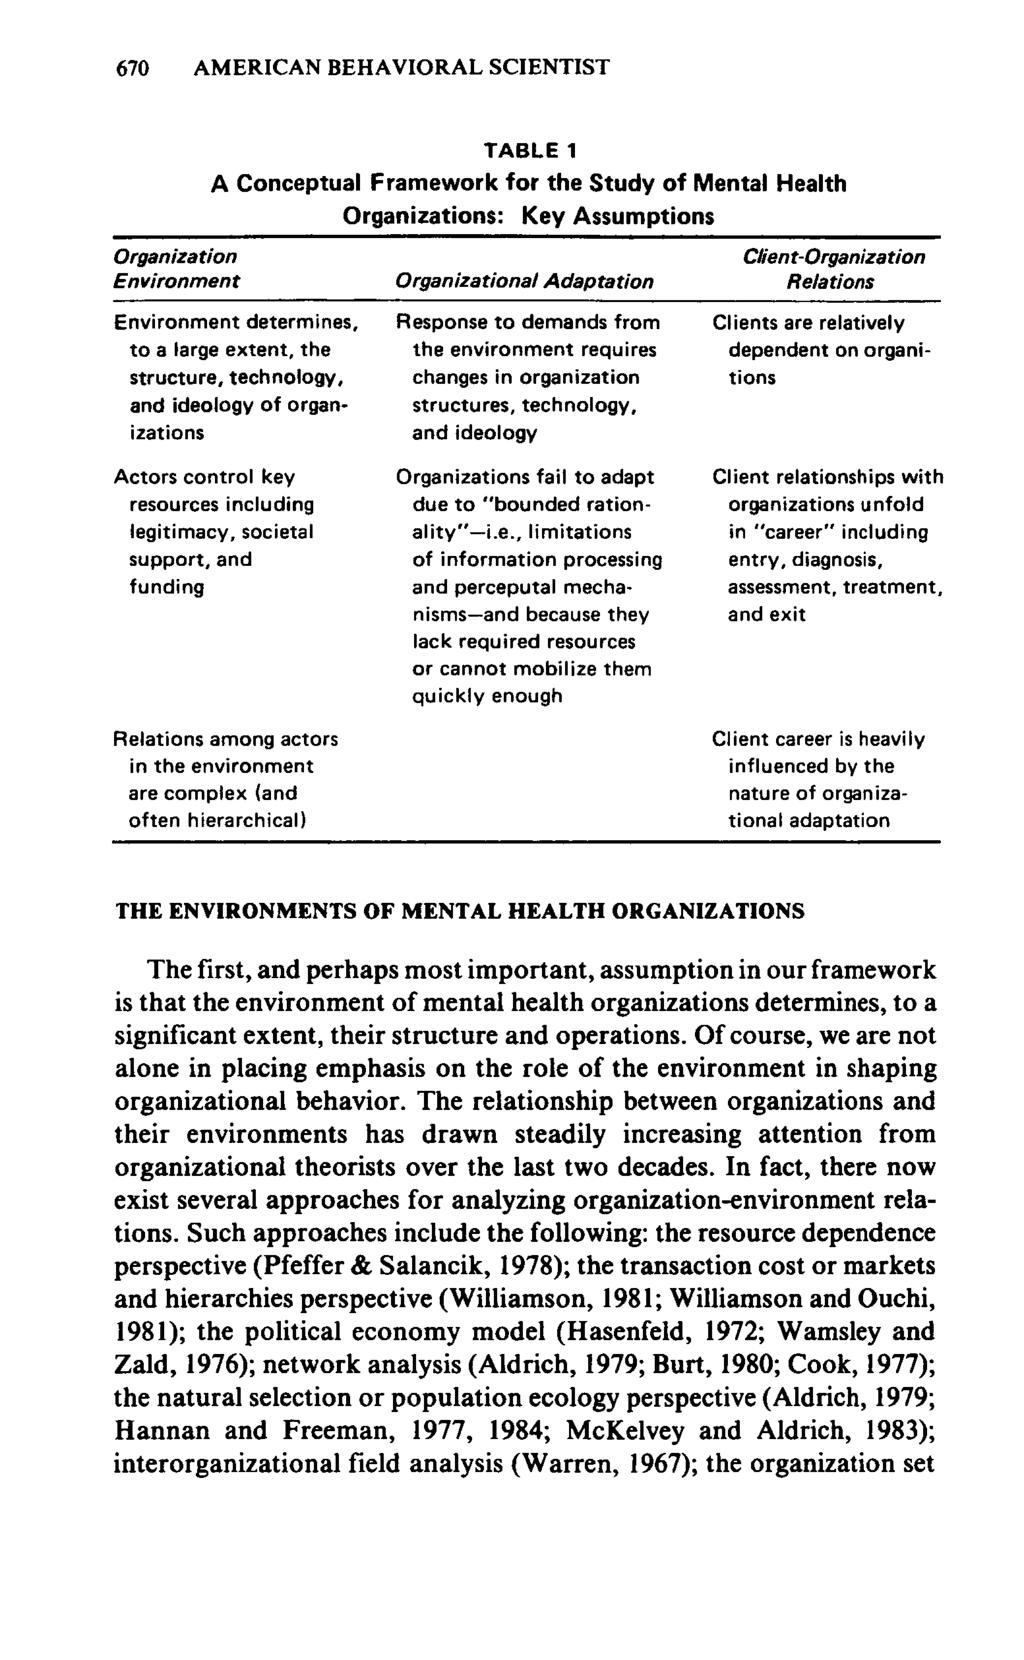 670 TABLE 1 A Conceptual Framework for the Study of Mental Health Organizations: Key Assumptions THE ENVIRONMENTS OF MENTAL HEALTH ORGANIZATIONS The first, and perhaps most important, assumption in